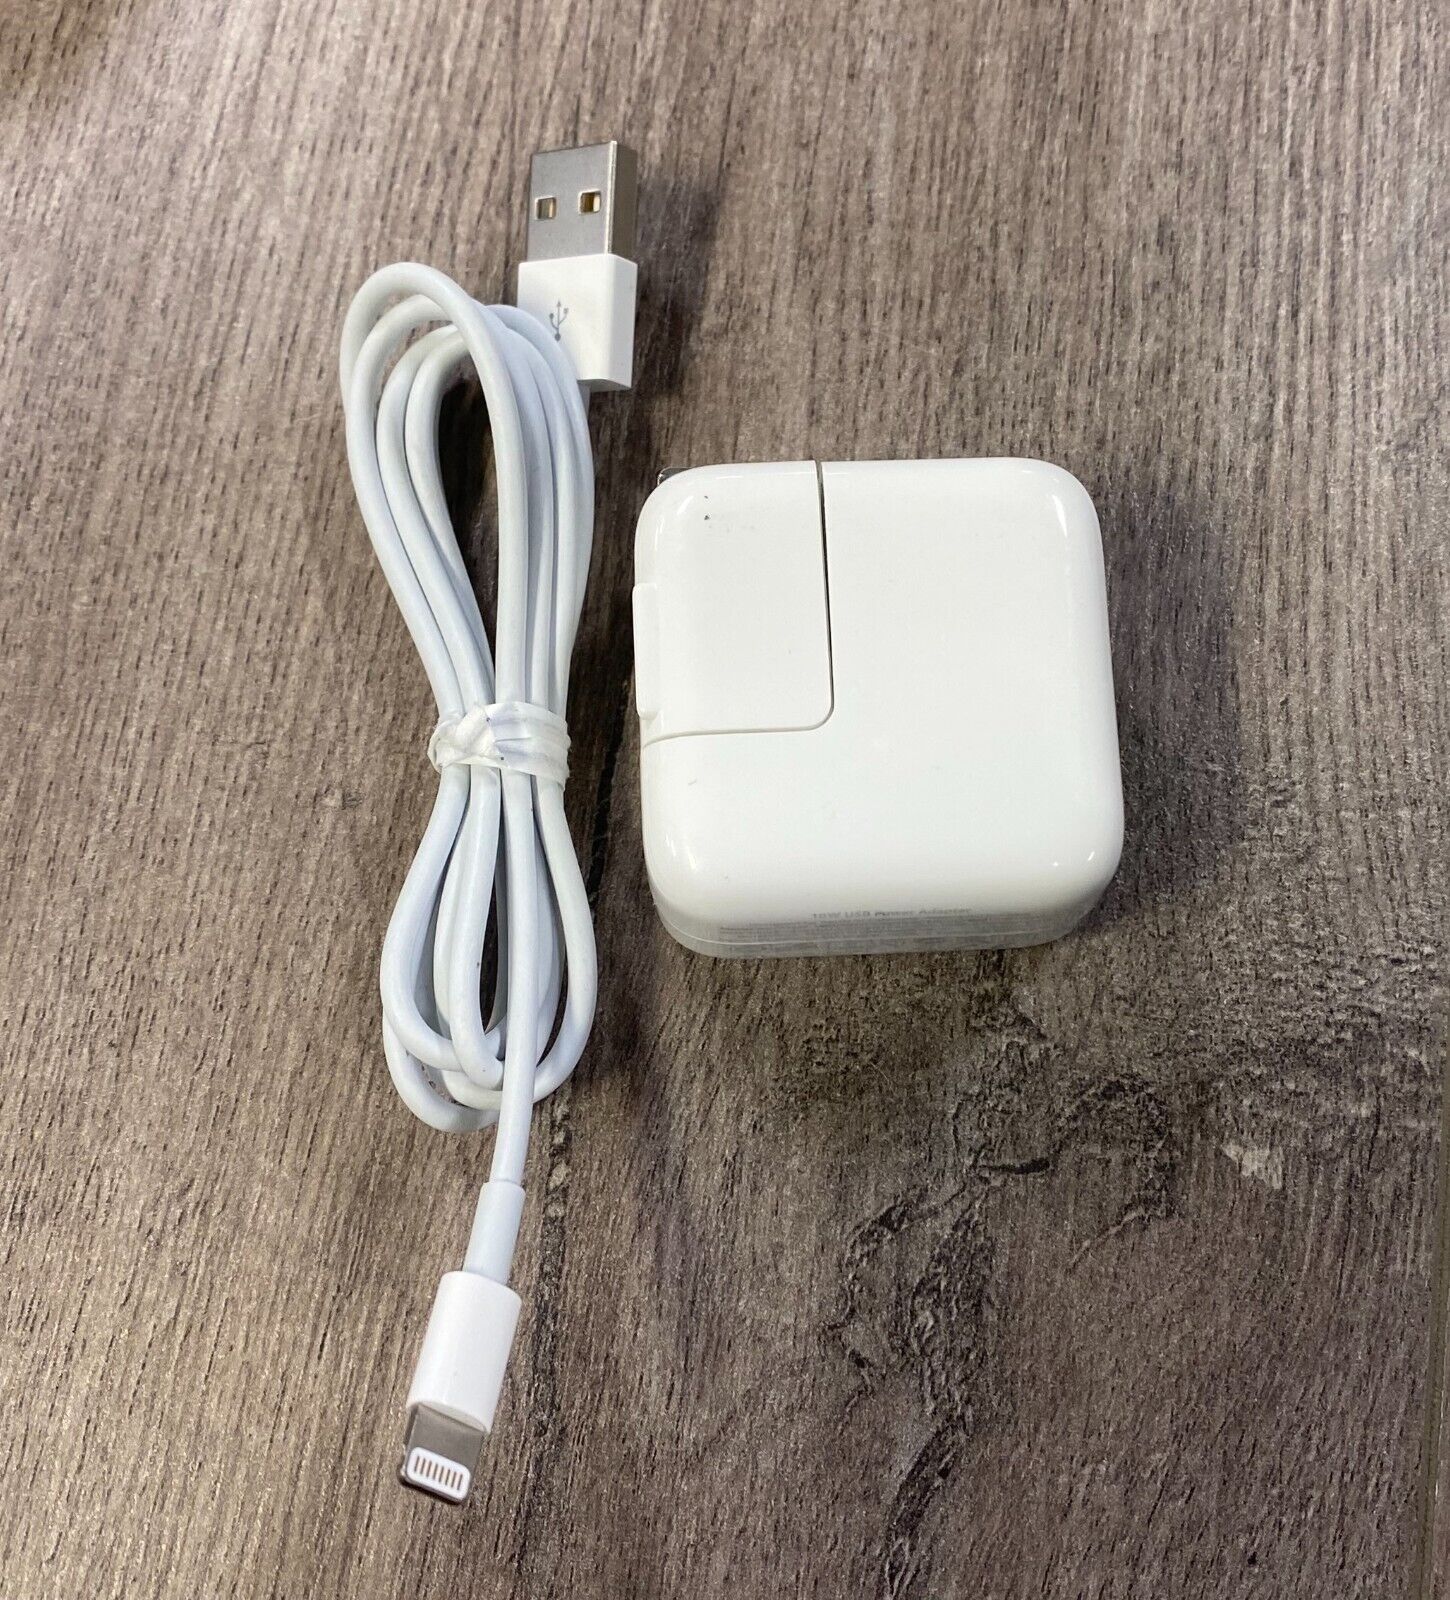 OEM Apple 10W GENUINE USB Wall Plug Charger Adapter iPhone iPad Lightning cable